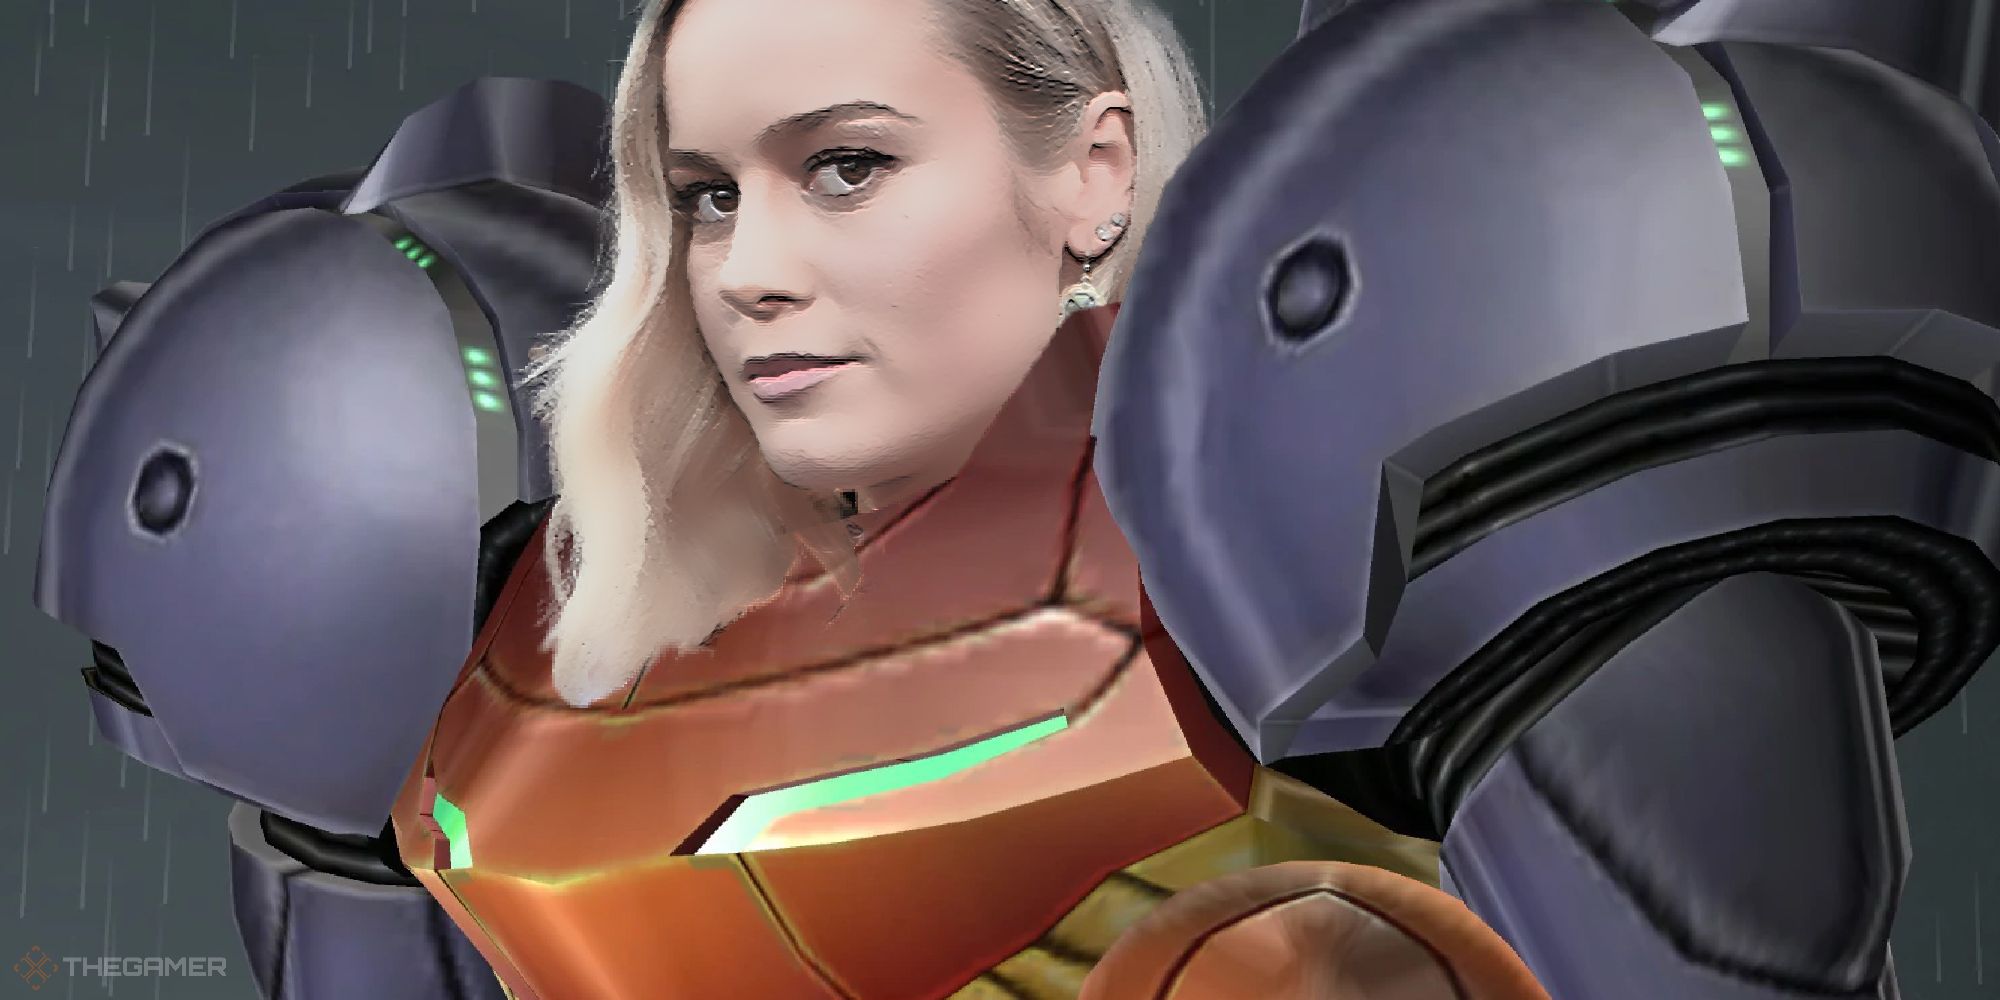 So Are We Actually Going To Cast Brie Larson As Samus Aran Or What